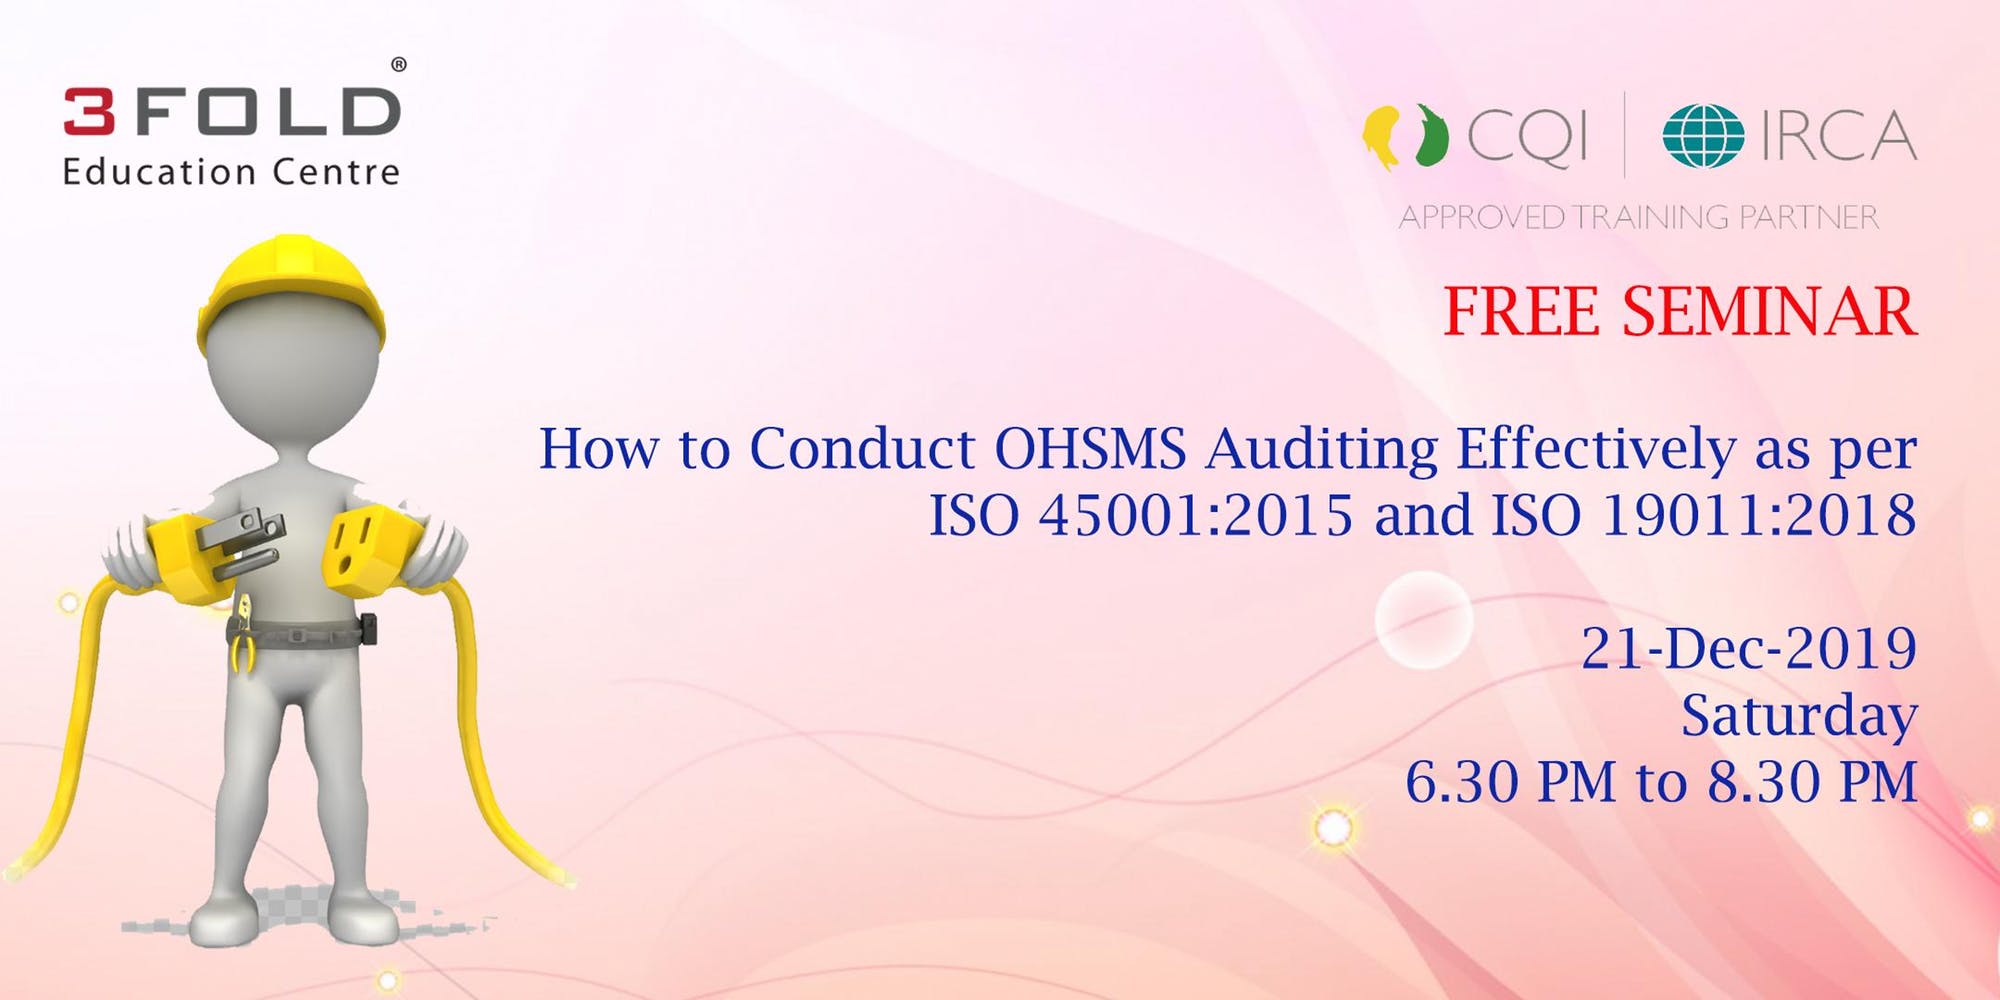 FREE SEMINAR How to Conduct OHSMS Auditing Effectively